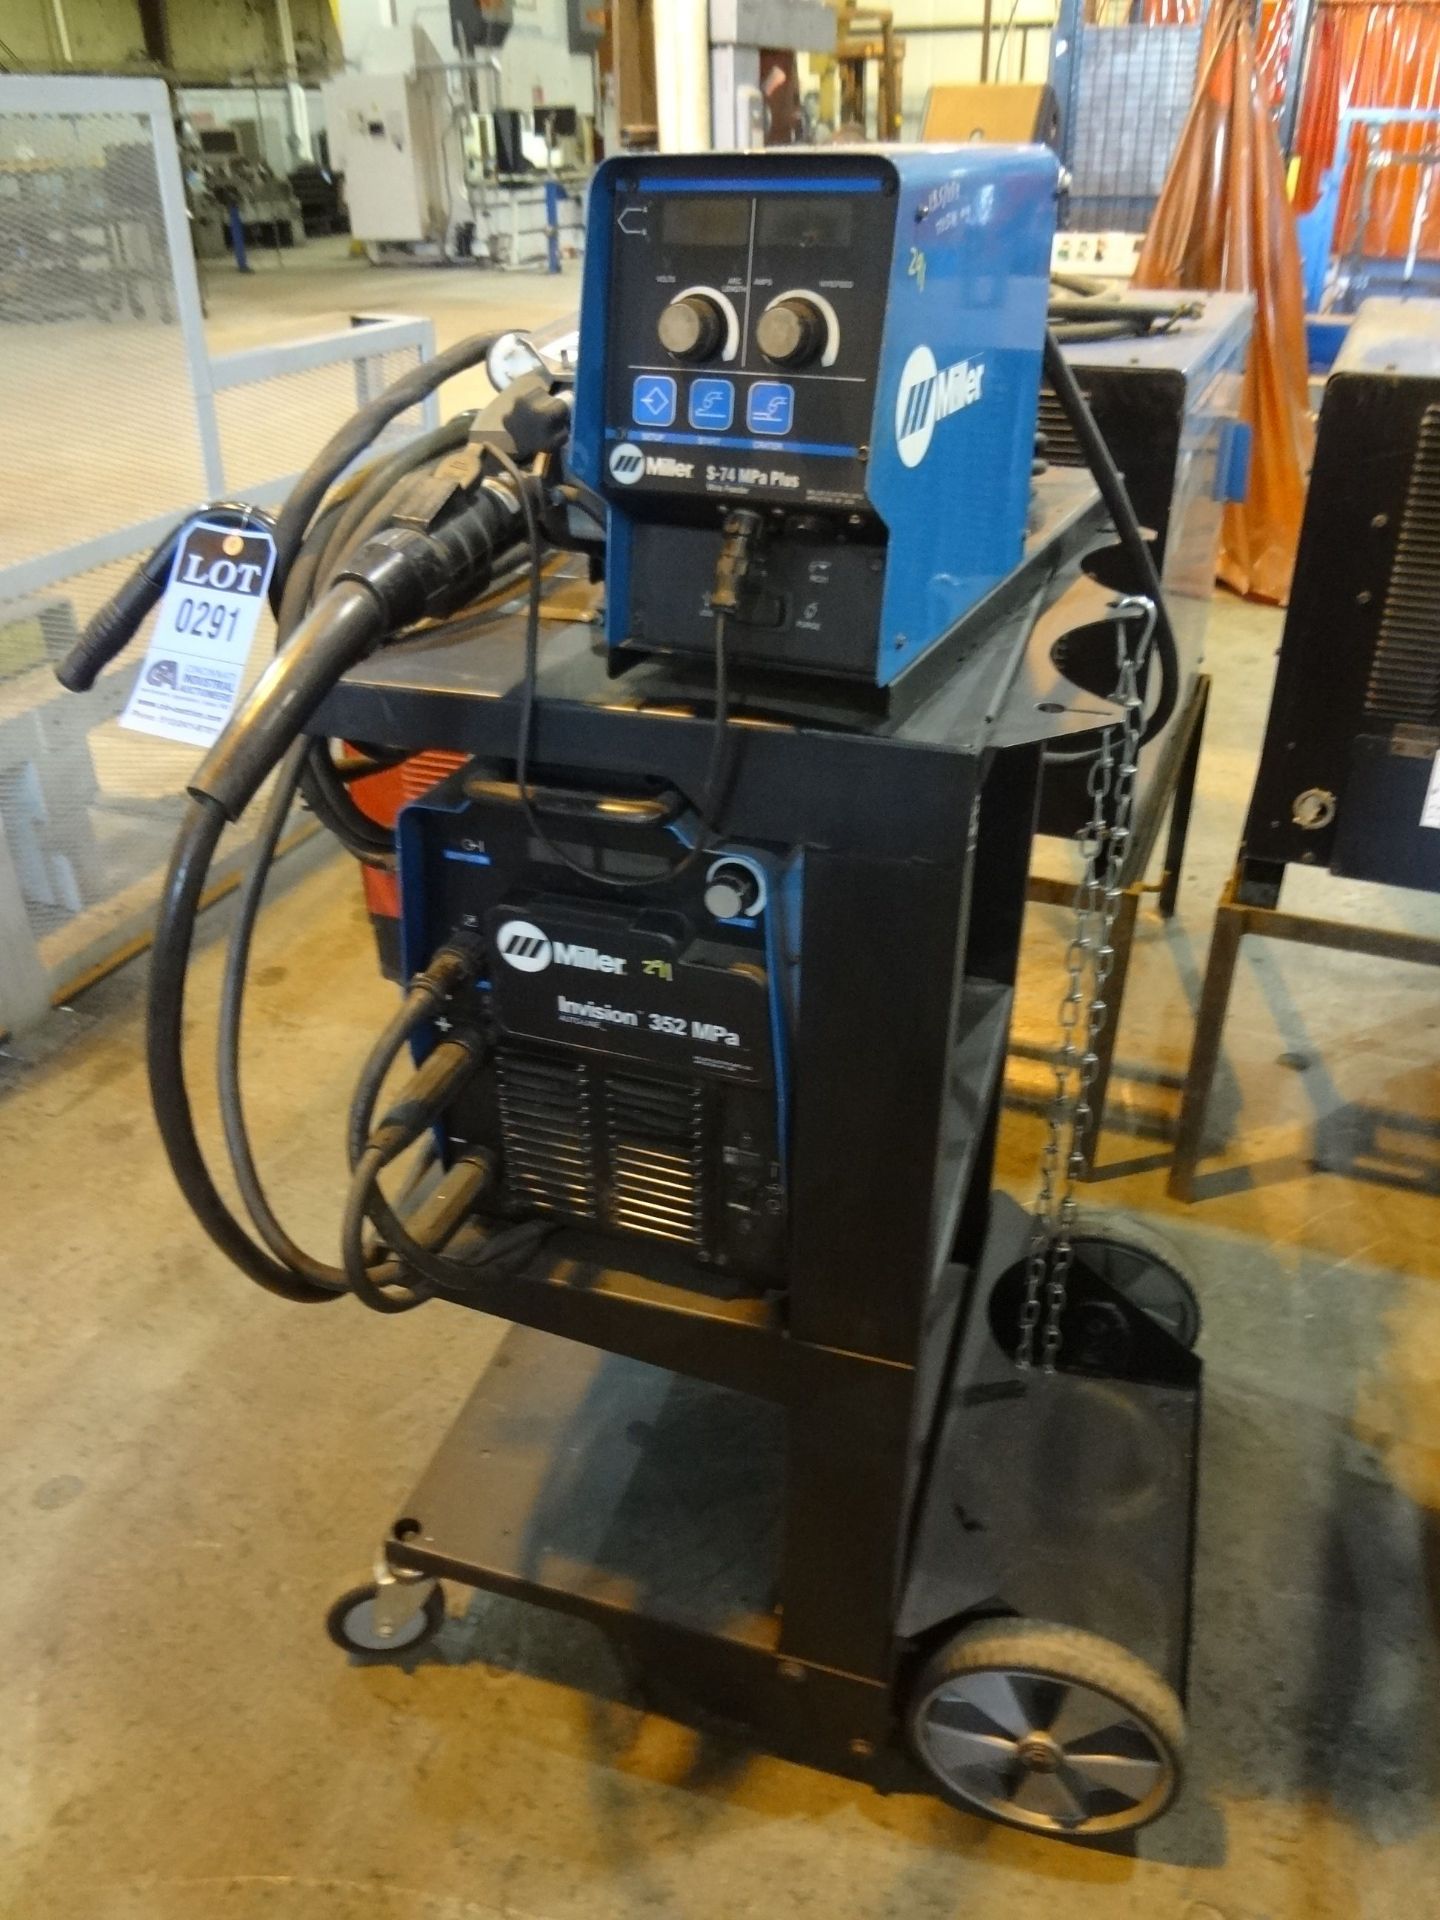 350 AMP MILLER INVISION 352 MPA AUTOLINE WELDER; S/N MD300146U, W/ MILLER S-74 MPA PLUS WIRE FEED